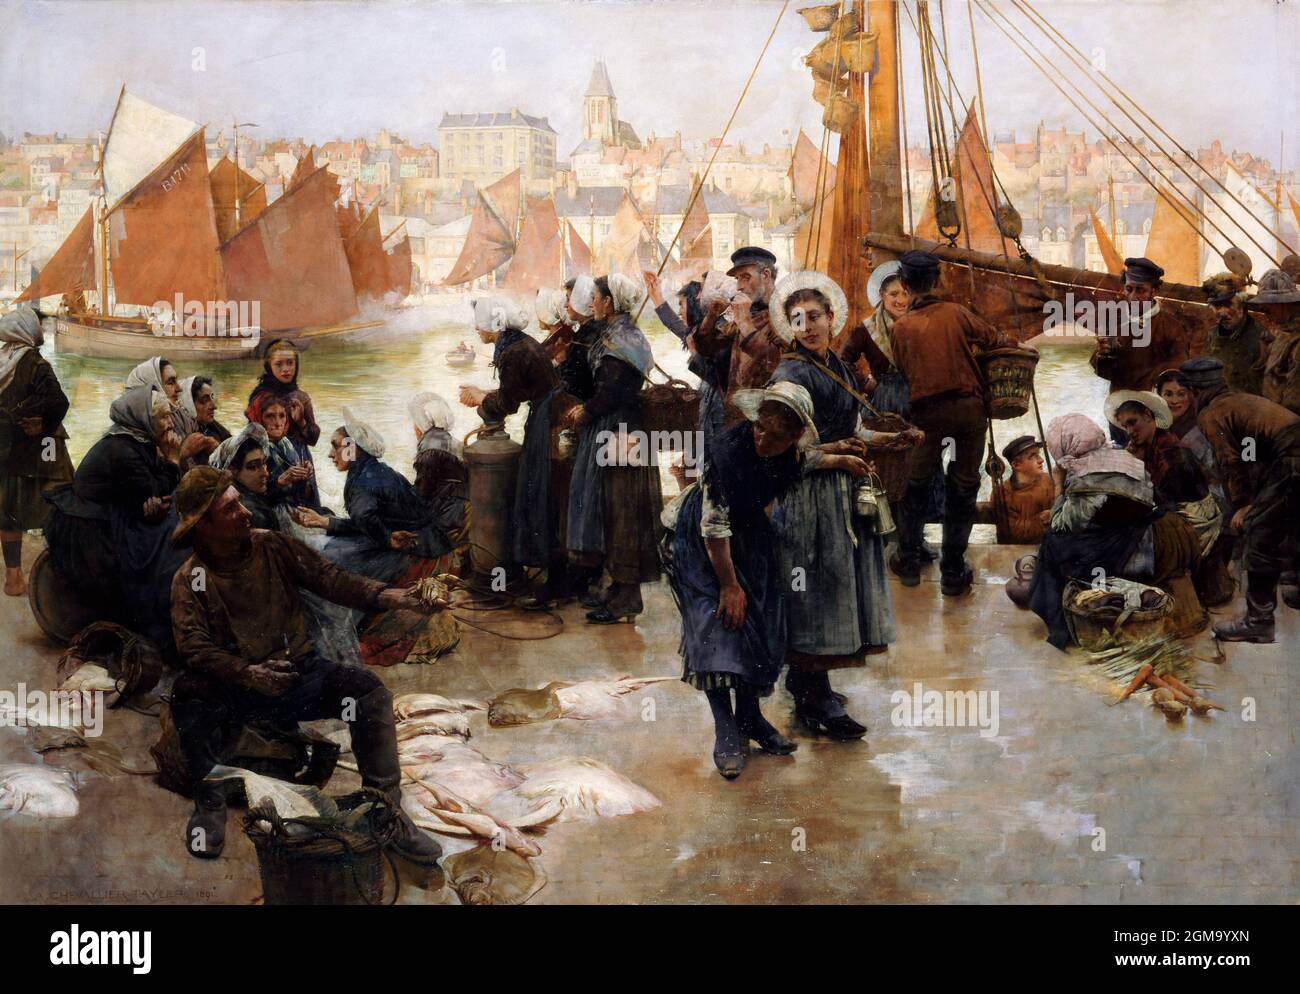 The Departure of the Fishing Fleet, Boulogne, by Albert Chevallier Tayler (1862-1925), oil on canvas, 1891 Stock Photo